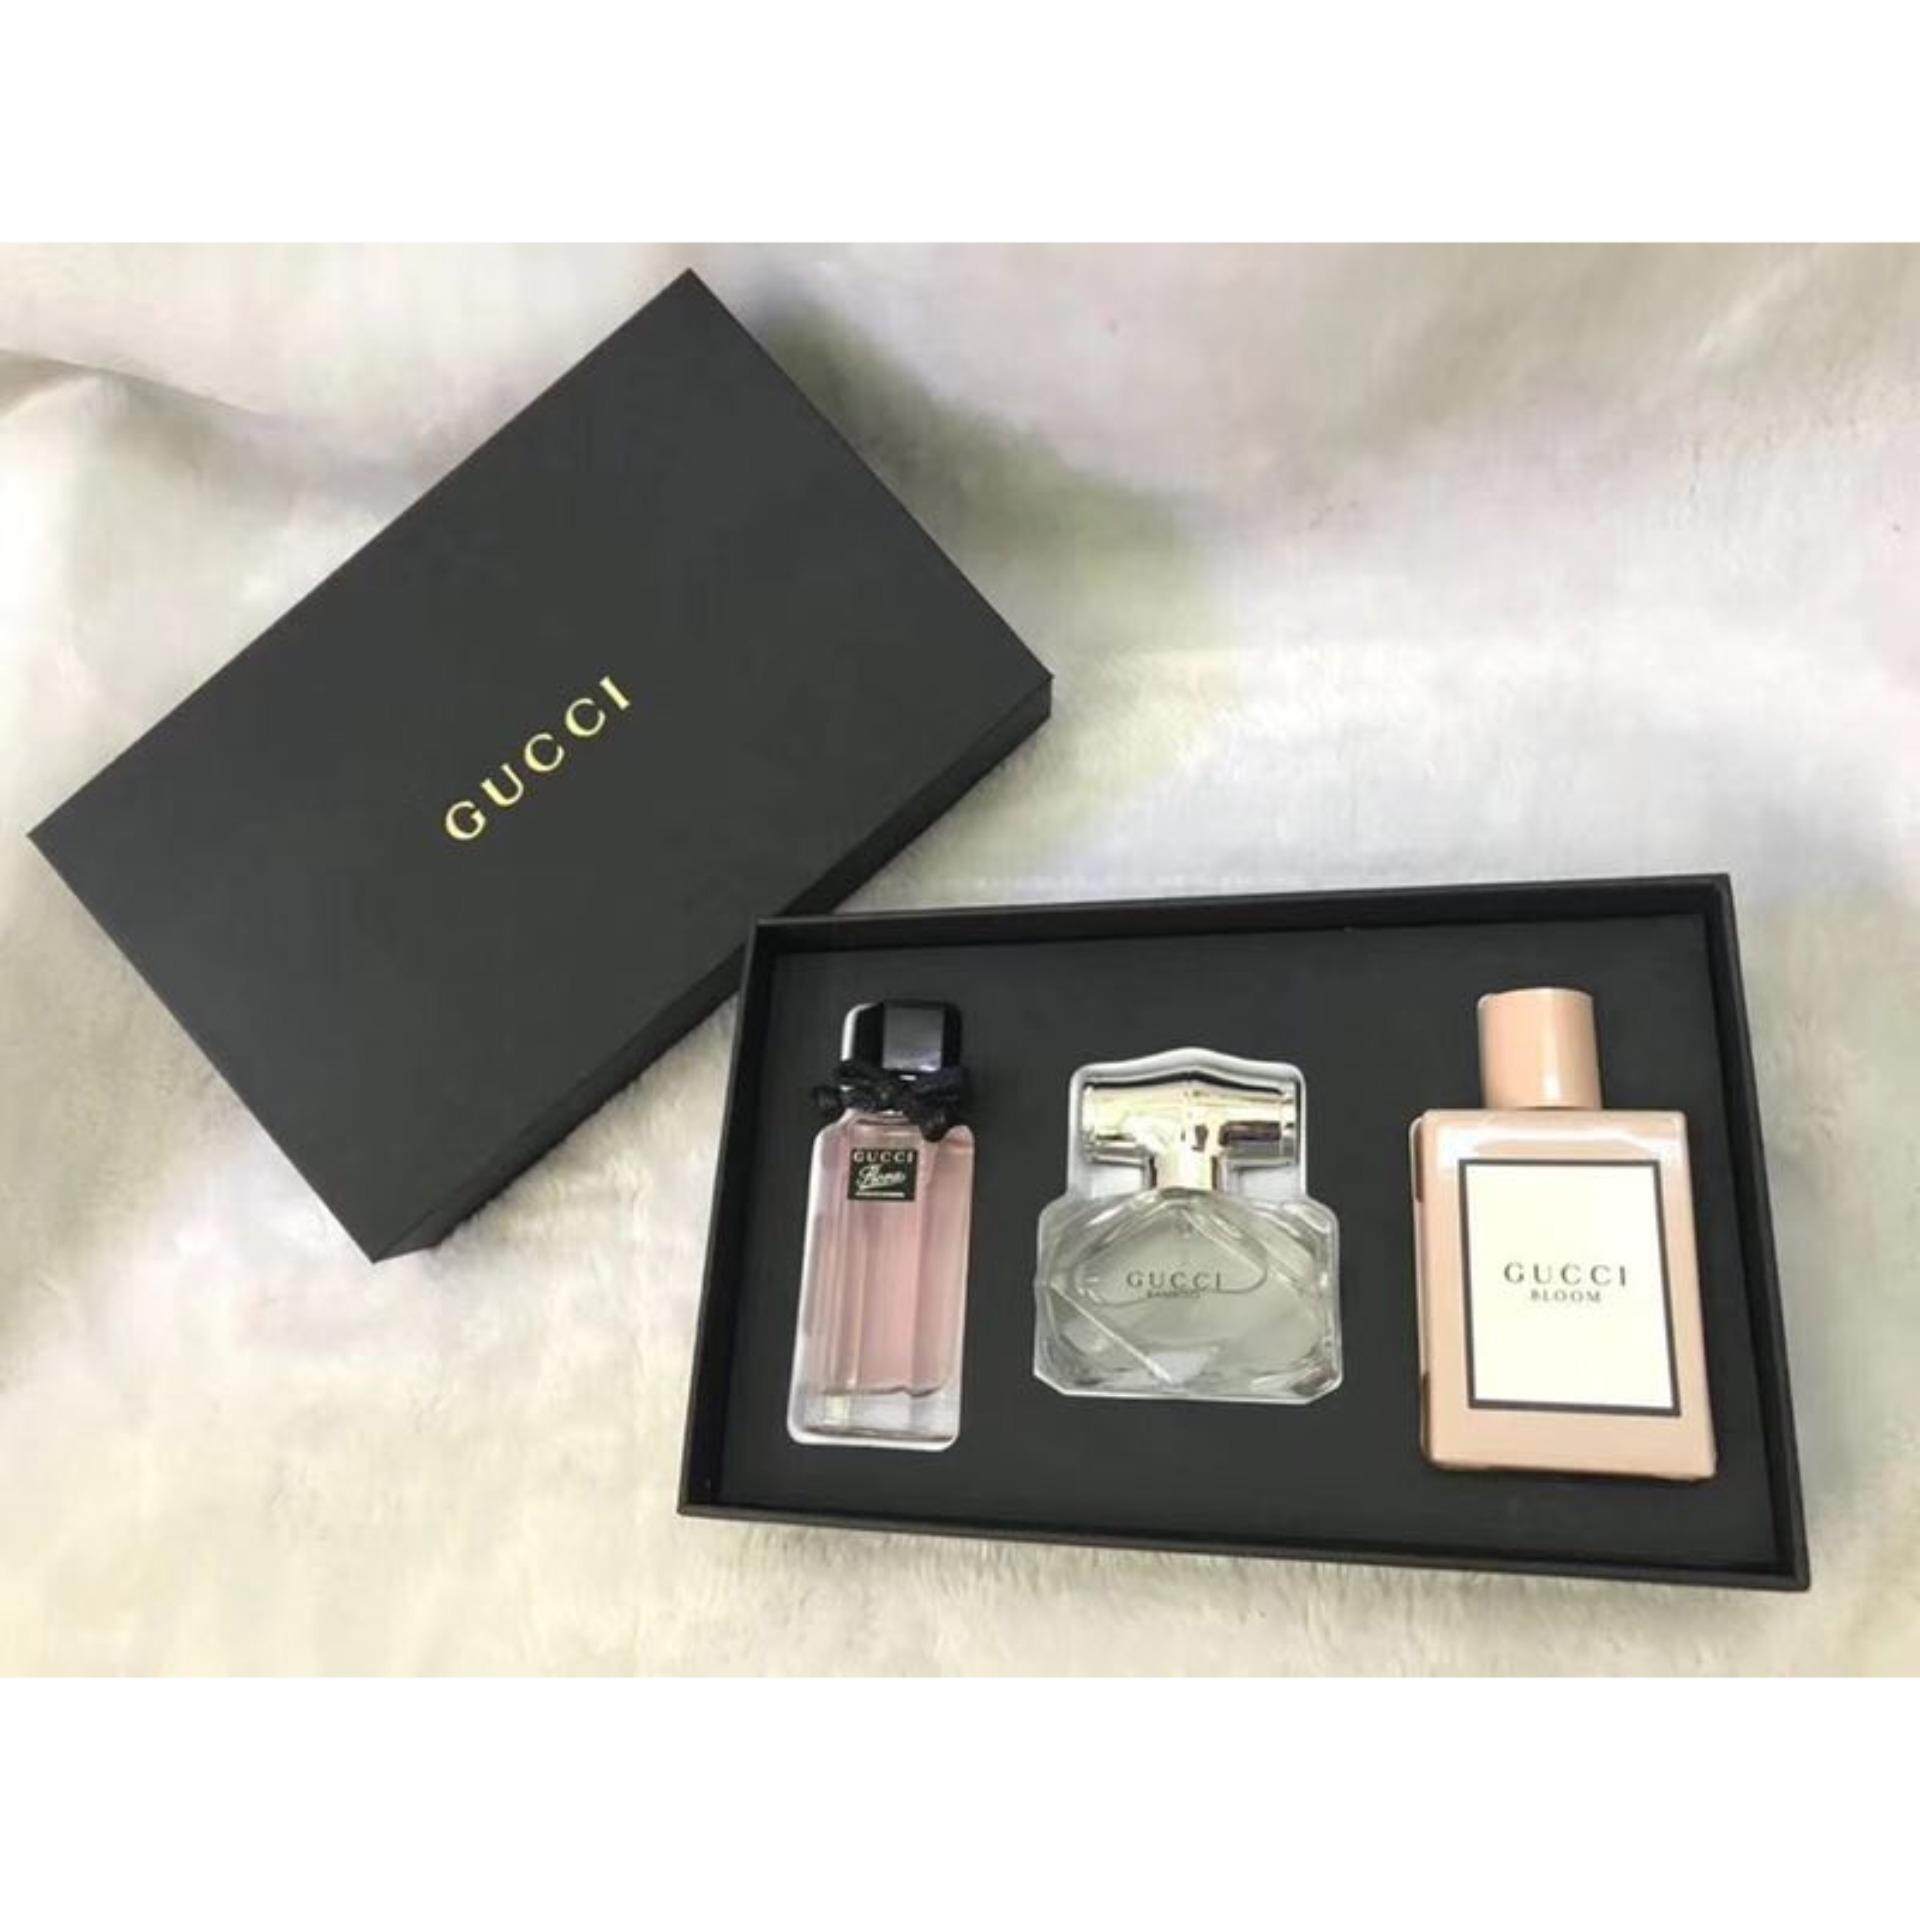 Guccii New Black Parfum Set for Women 3 in 1 with 30ml